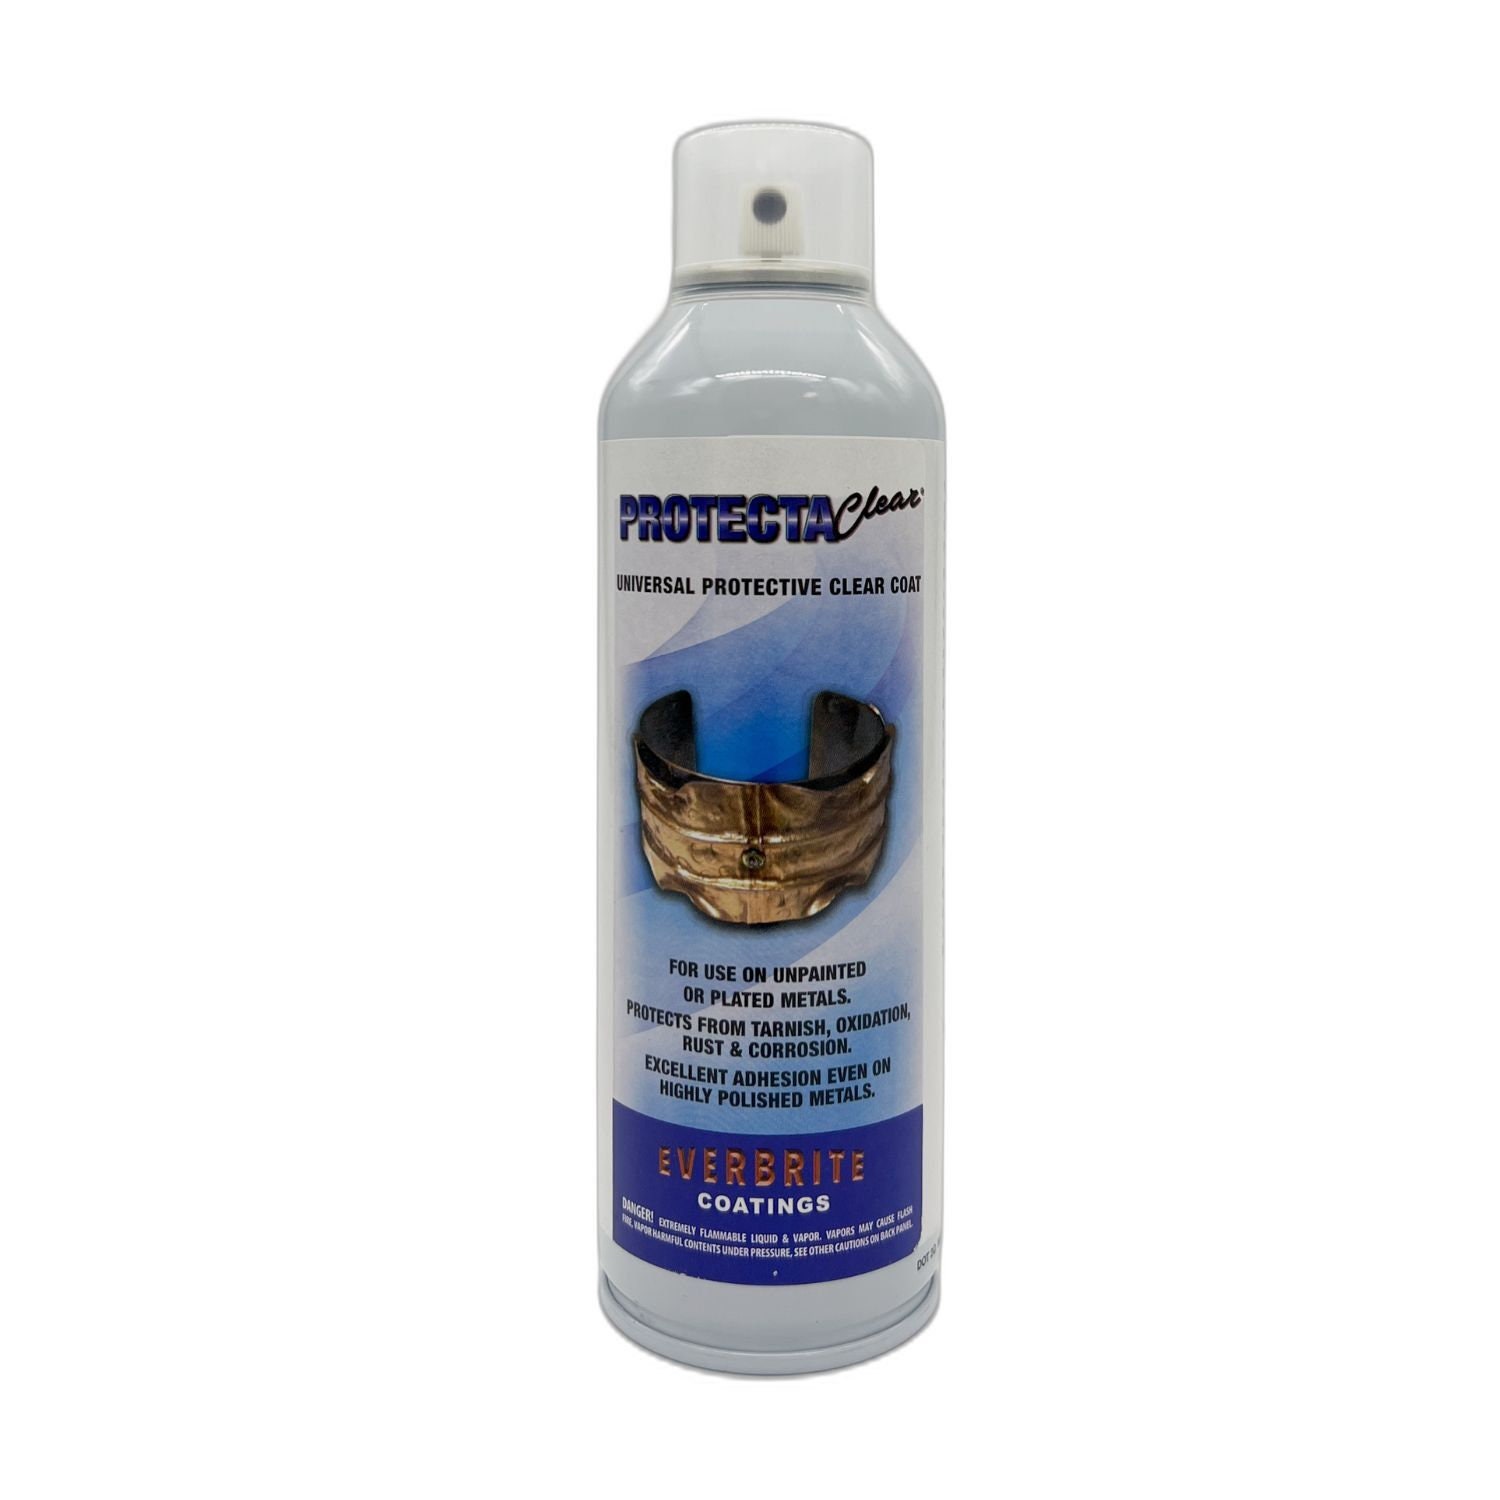 ProtectaClear seals polished metal. Prevent tarnish and corrosion